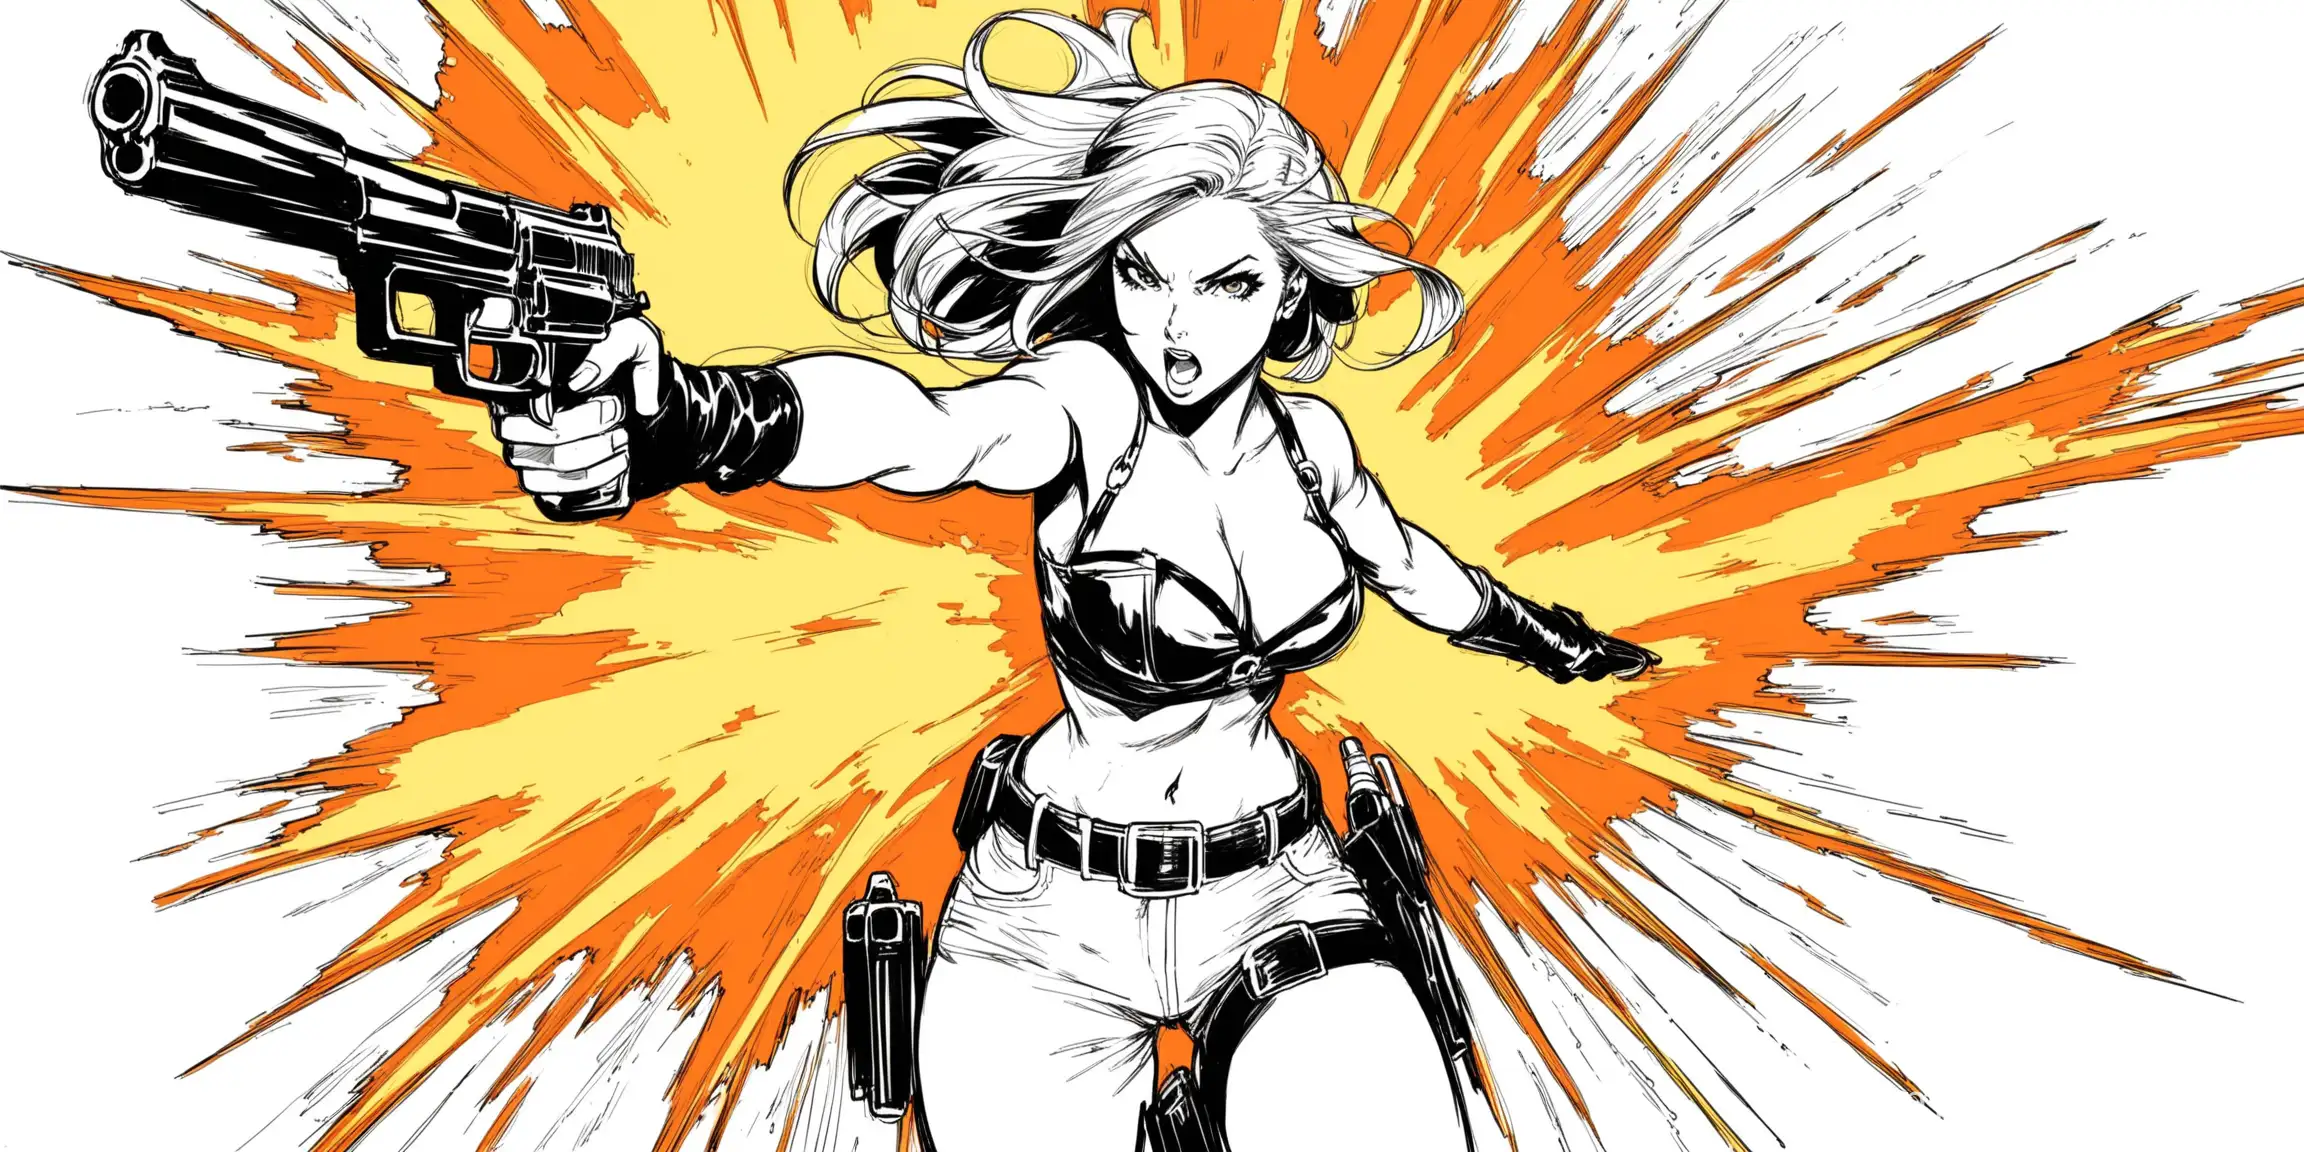 Make pencil line drawing danger girl with guns blazing on white background 